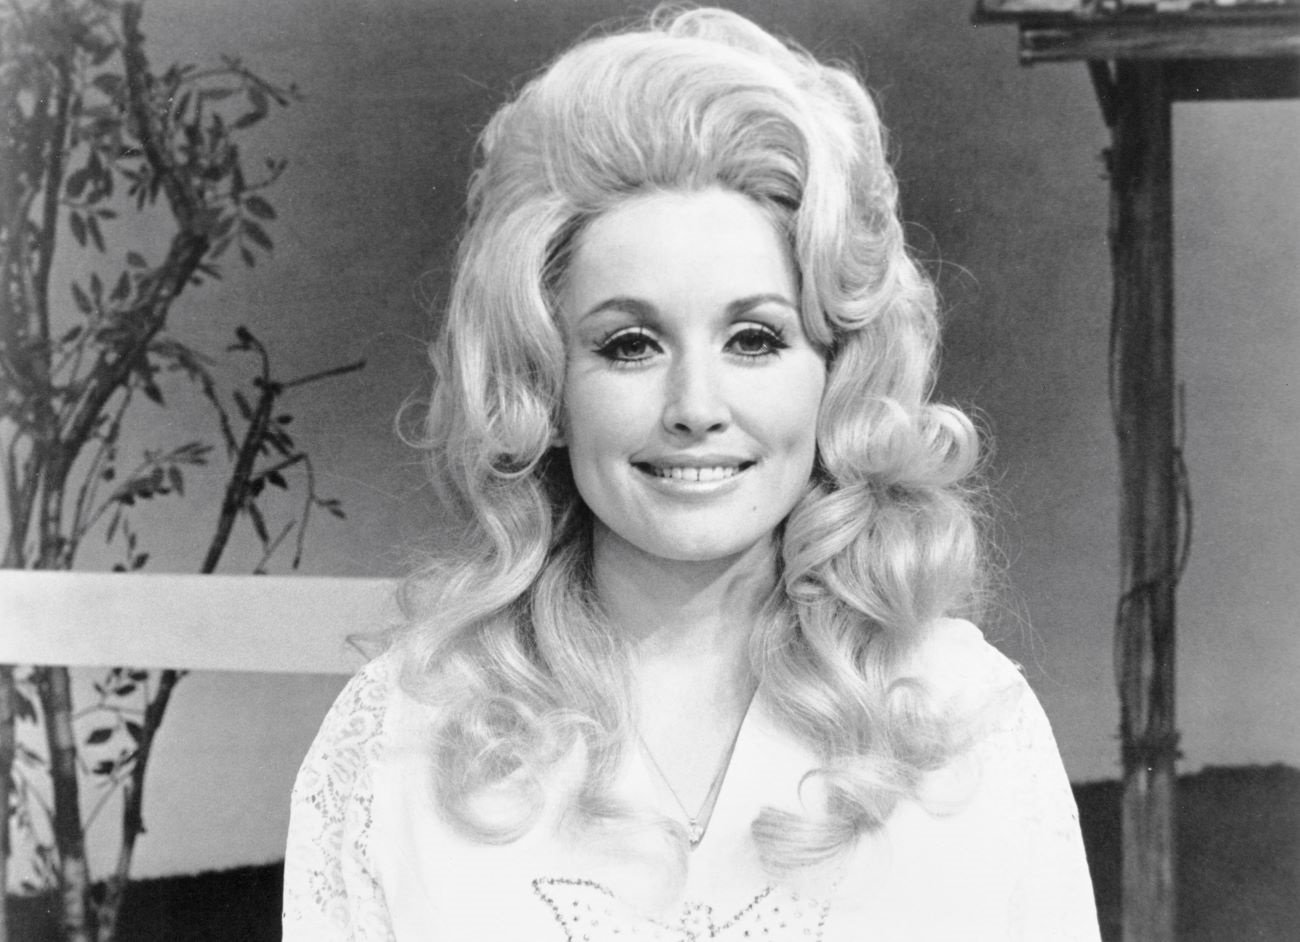 A black and white photo of Dolly Parton wearing a white shirt and sitting in front of a fence and trees.